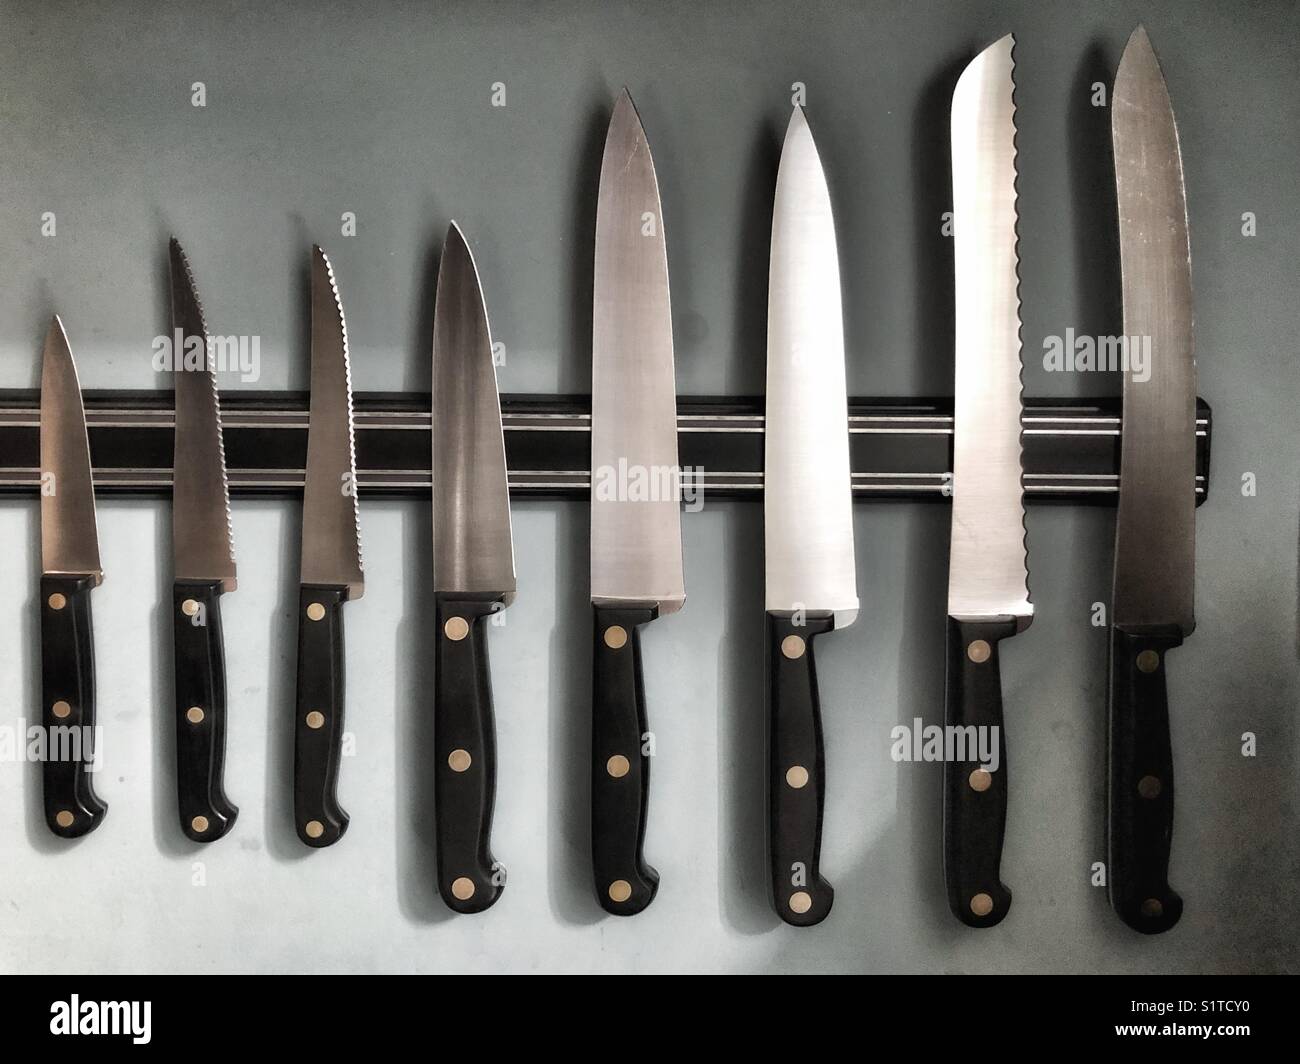 Row of kitchen knives on magnetic rack Stock Photo